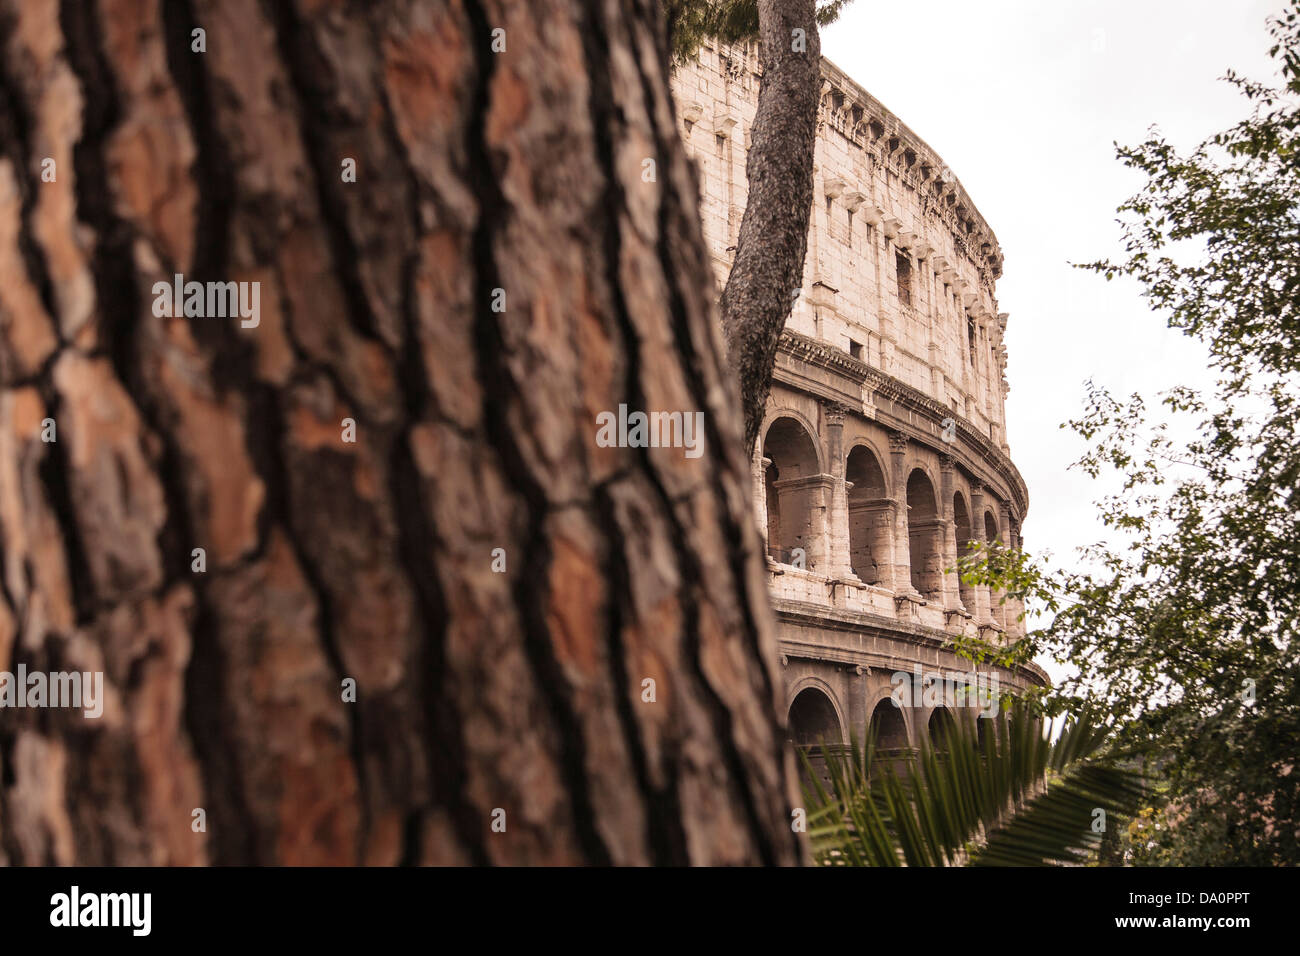 A section of the Colosseum seen from the parco del colle oppio in Rome, Italy. Stock Photo